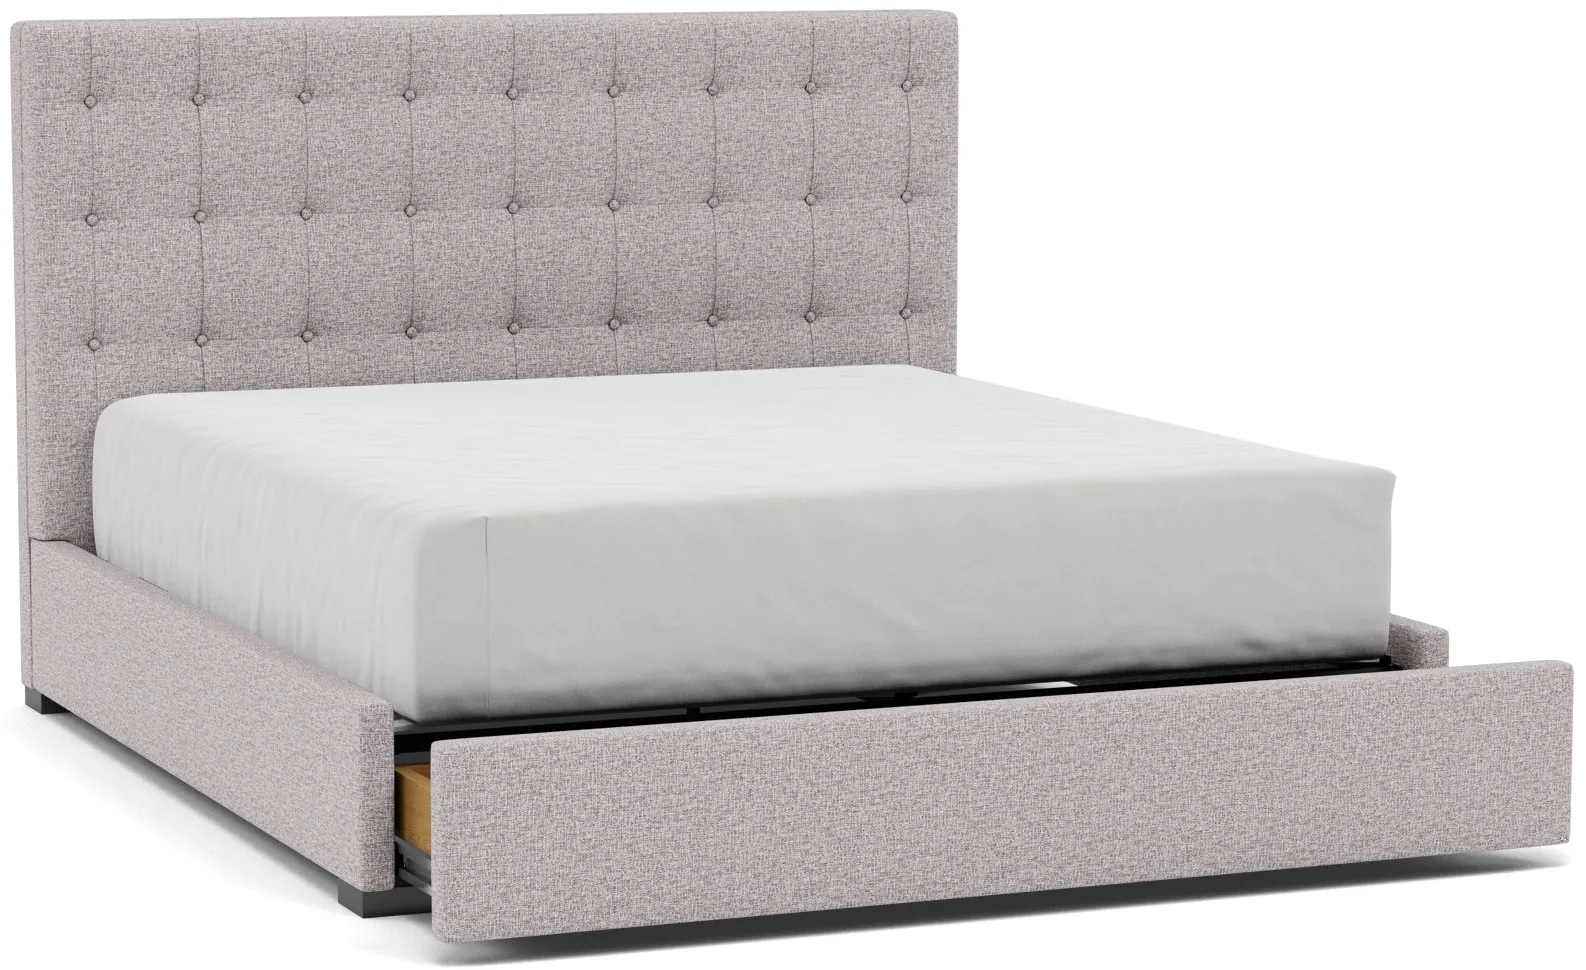 Abby King Upholstered Storage Bed in Tech Stone